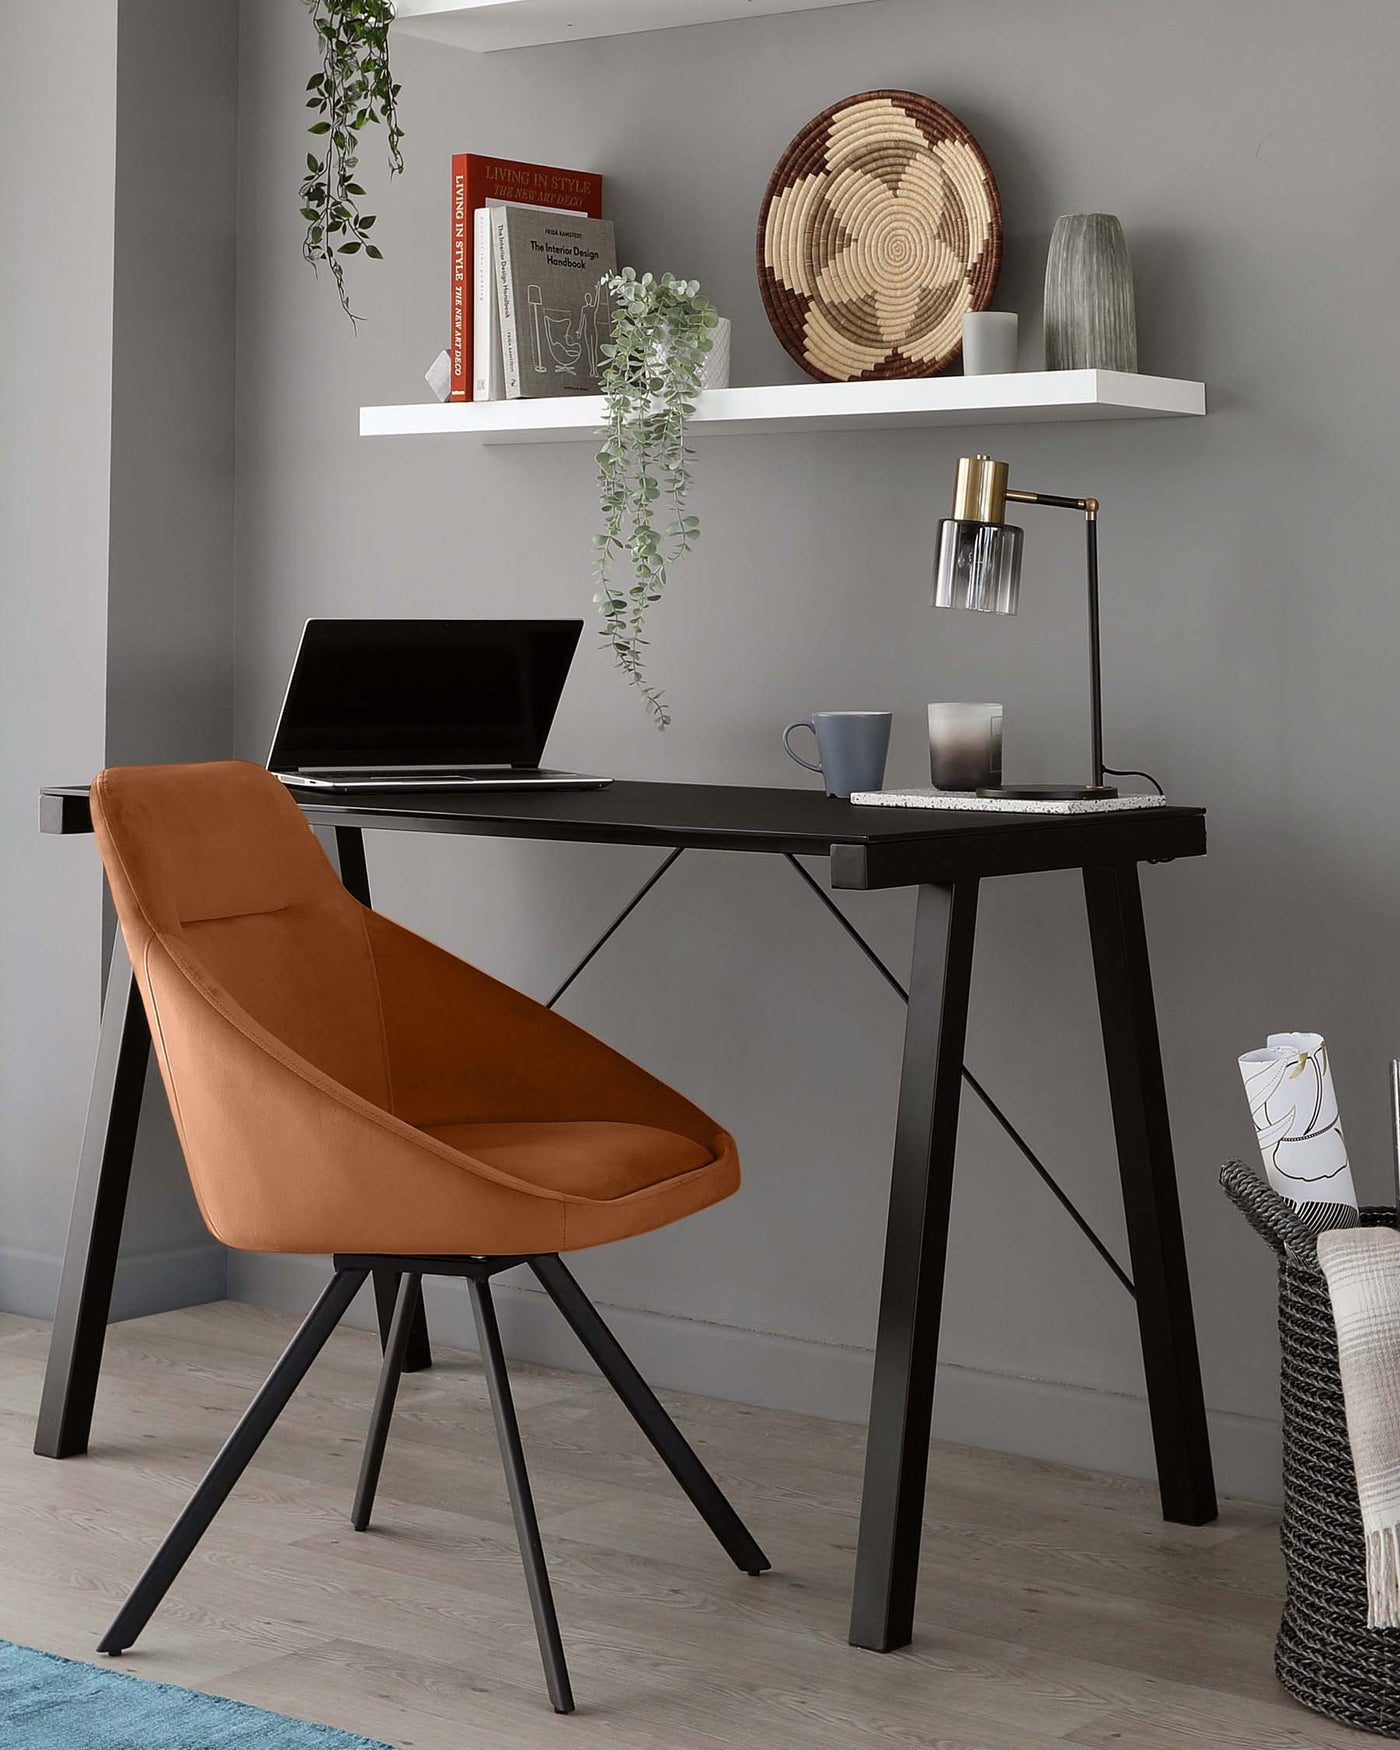 A contemporary home office setup featuring an angular black desk with a laptop on top, paired with a burnt orange upholstered desk chair with black legs. A wall-mounted white shelf displaying books and decorative items hangs above the desk, and a modern gold and black desk lamp illuminates the workspace.